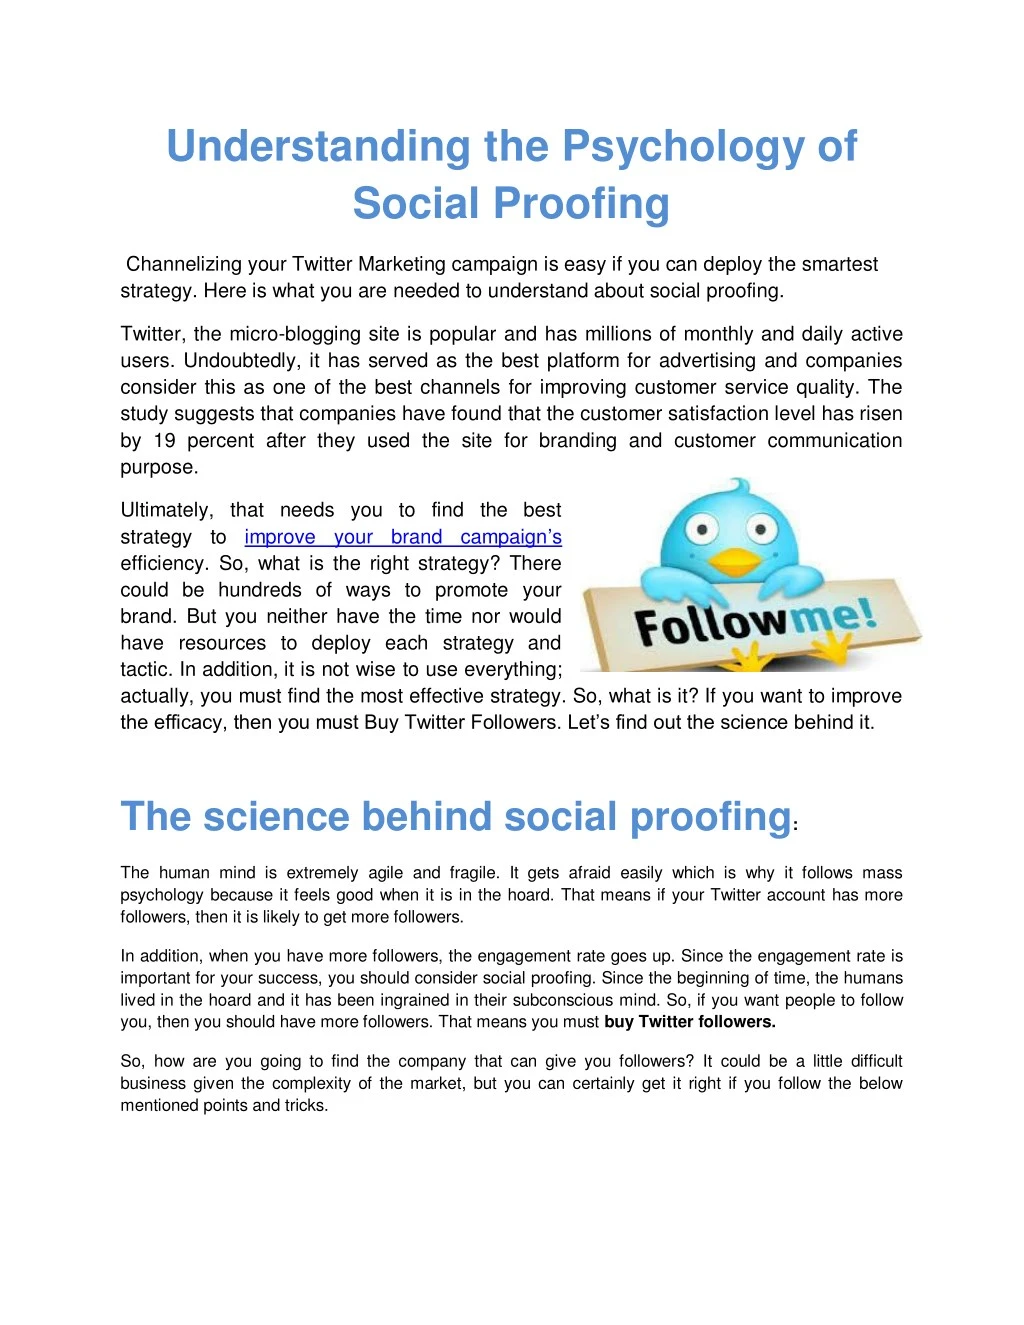 understanding the psychology of social proofing